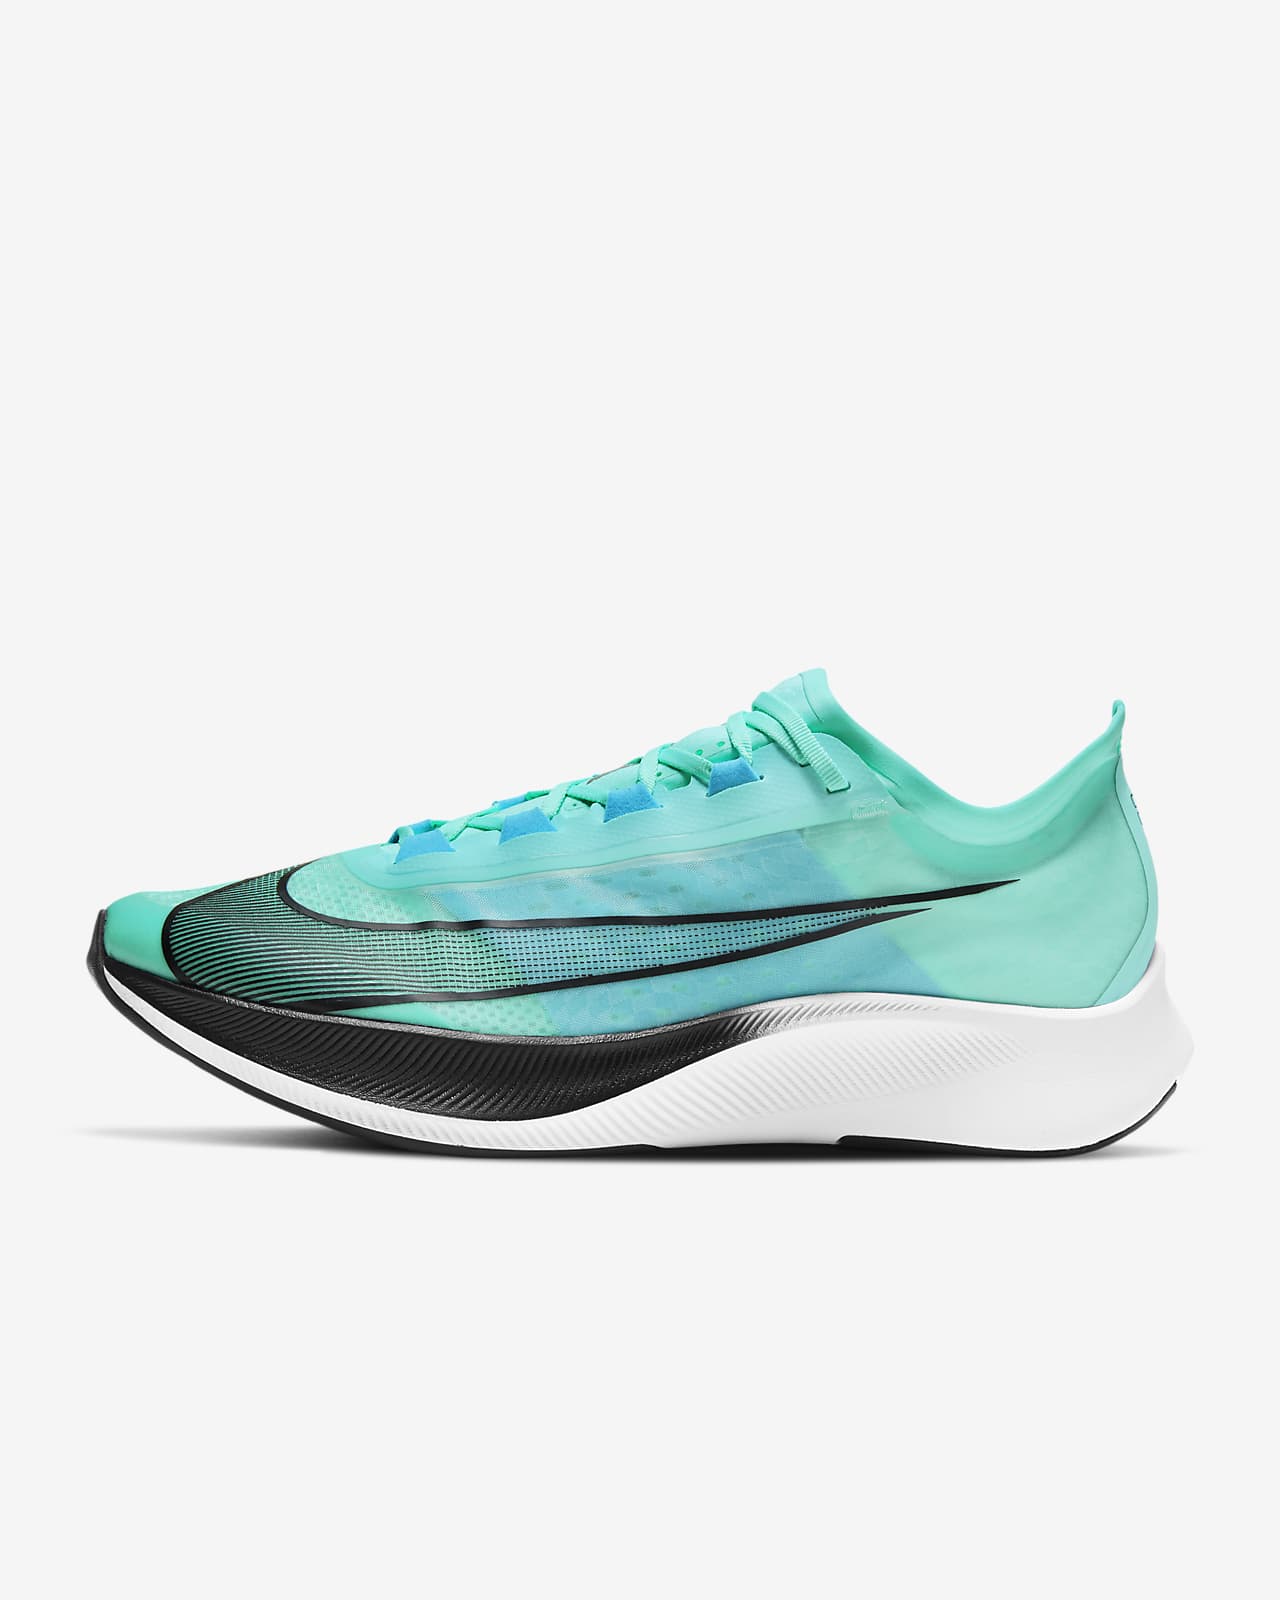 nike zoom fly 3 deals